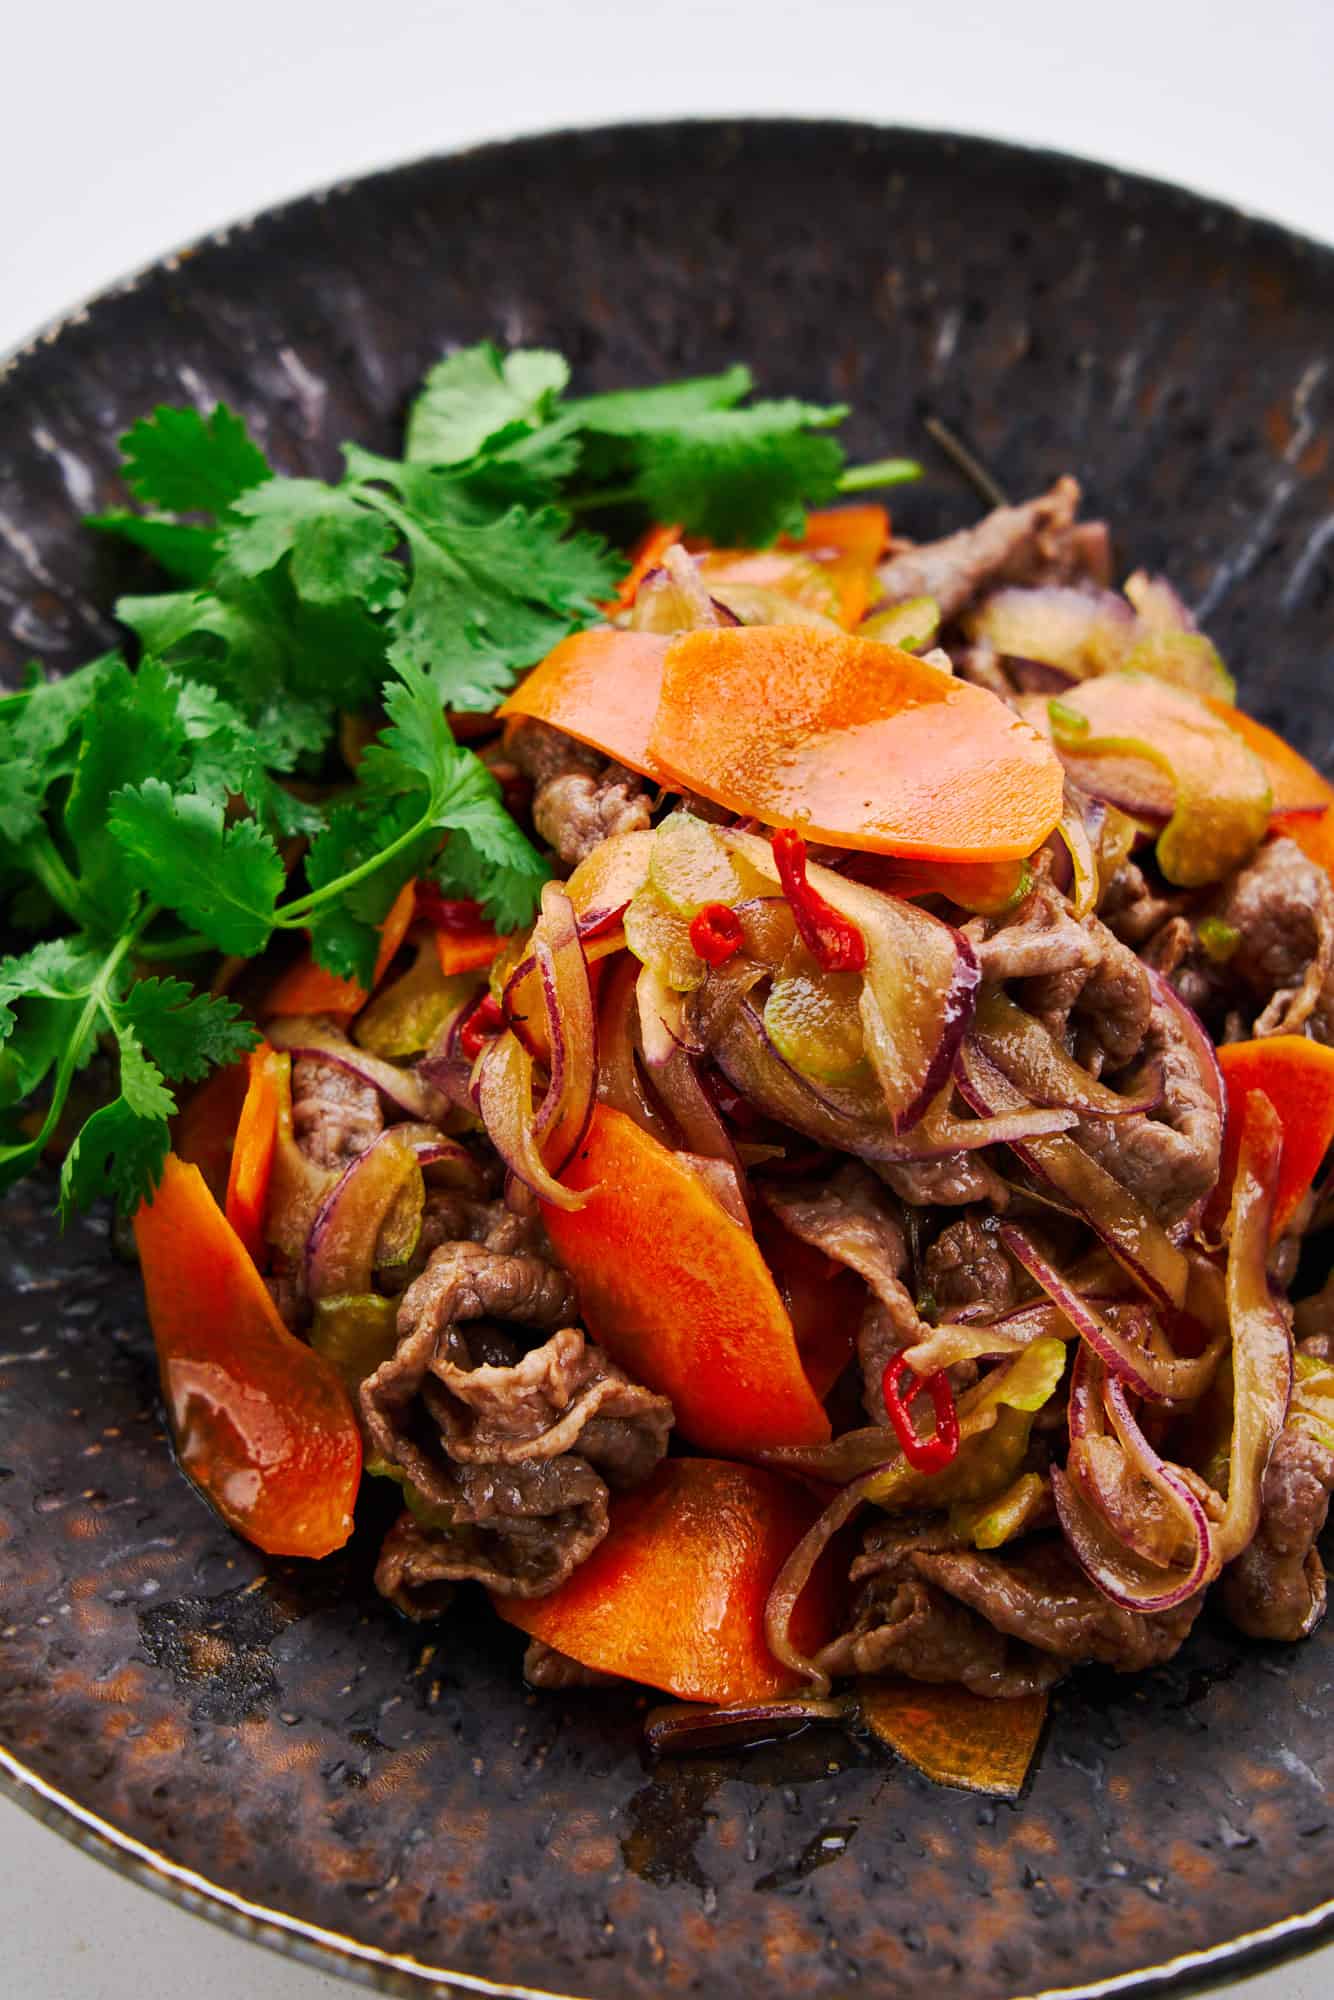 A delicious dish of marinated beef and vegetables